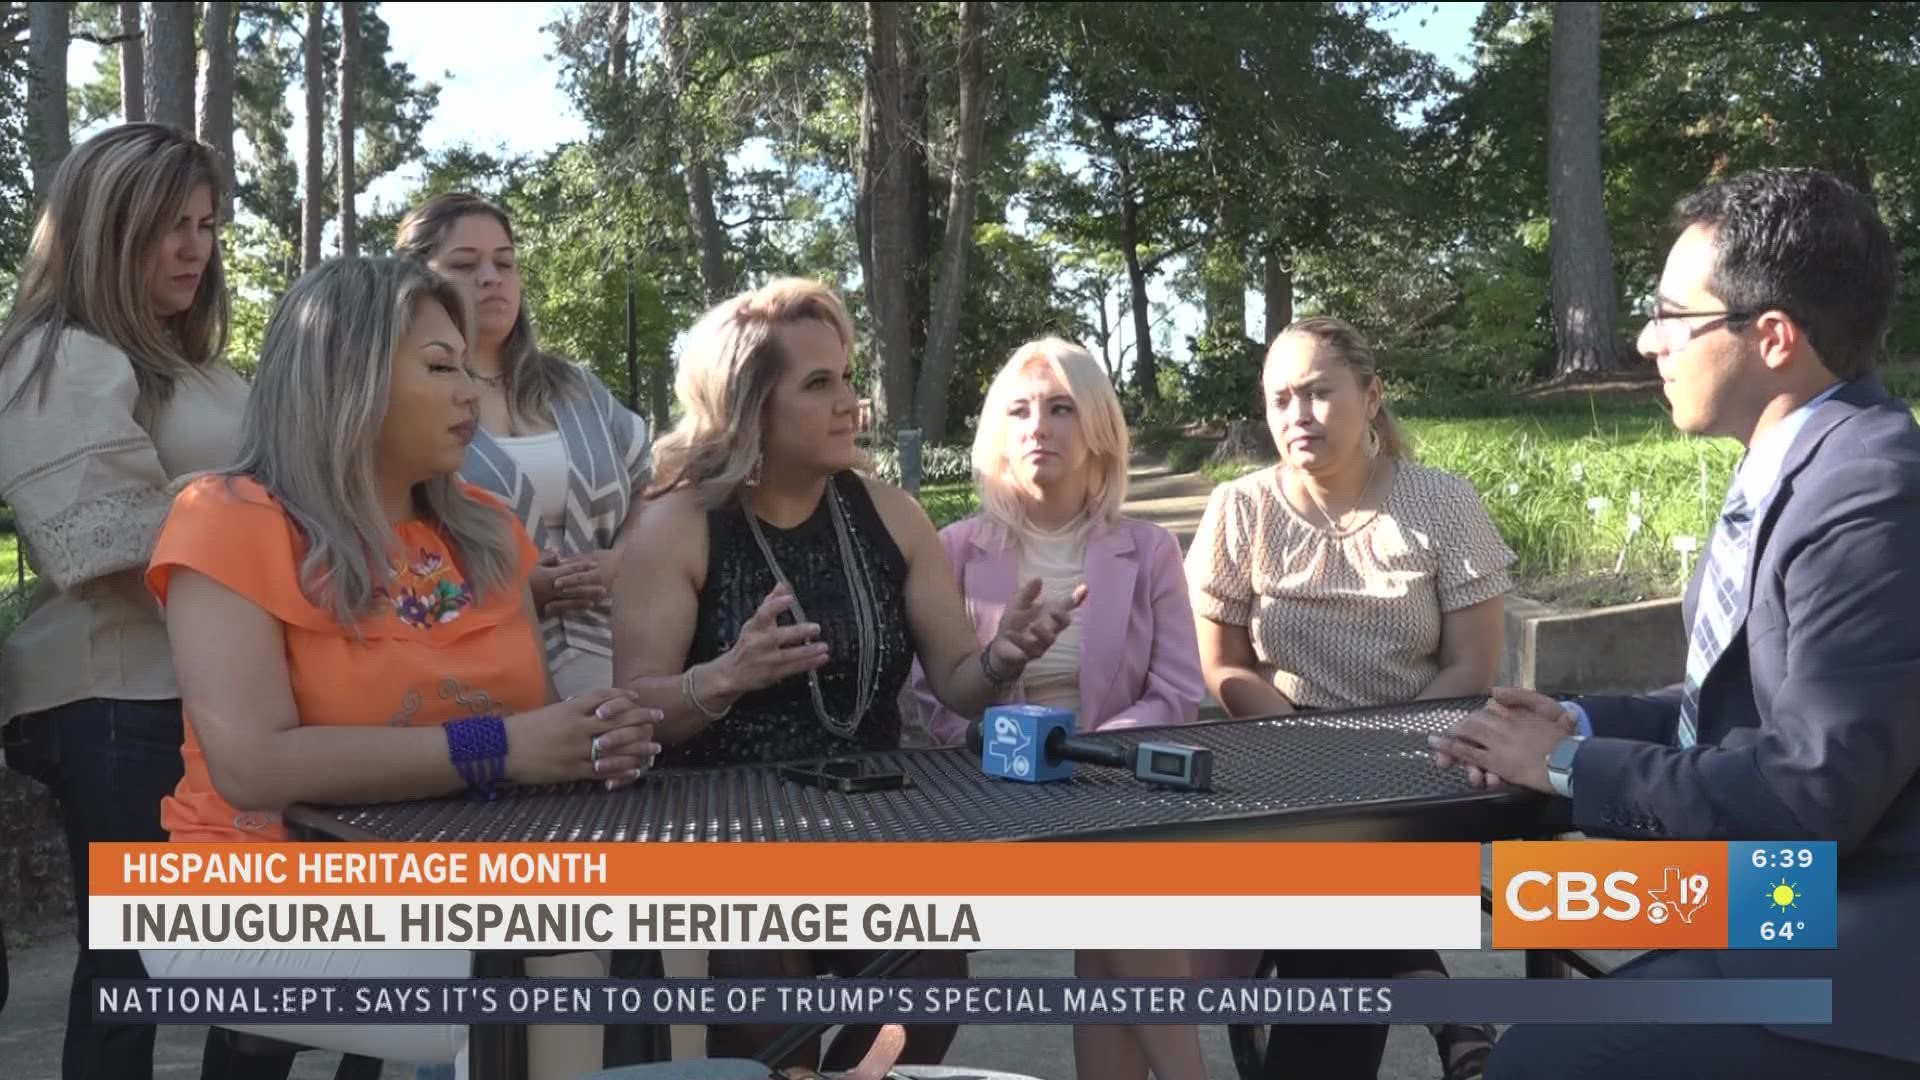 These women helped organize the inaugural Hispanic Heritage Gala which will take place inside the Tyler Rose Museum ballroom and will feature local artists